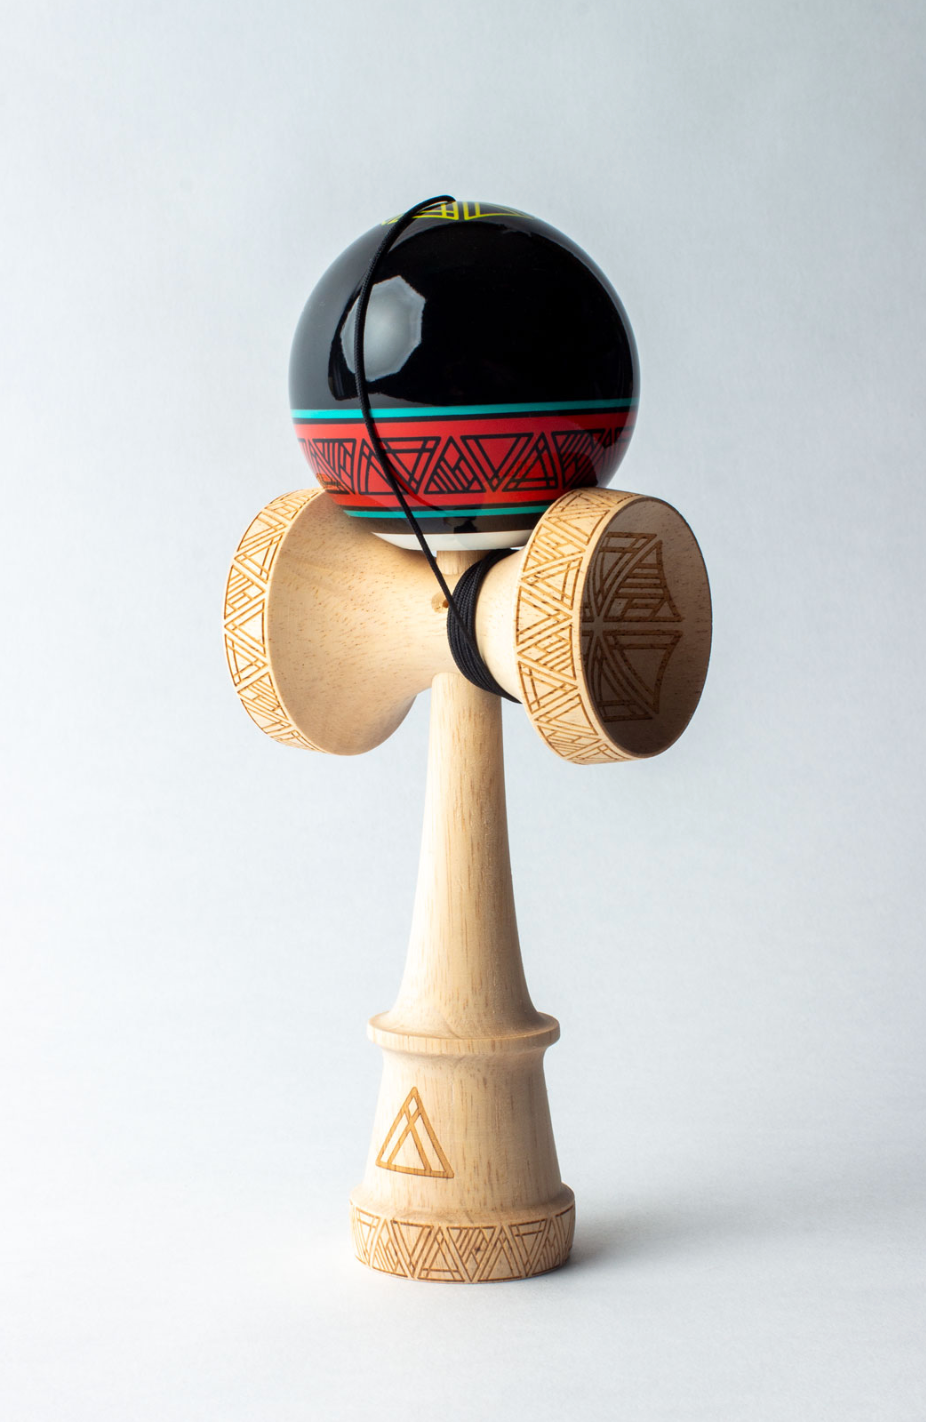 FINDLAY HATS X SWEETS - AMPED KENDAMA - RED